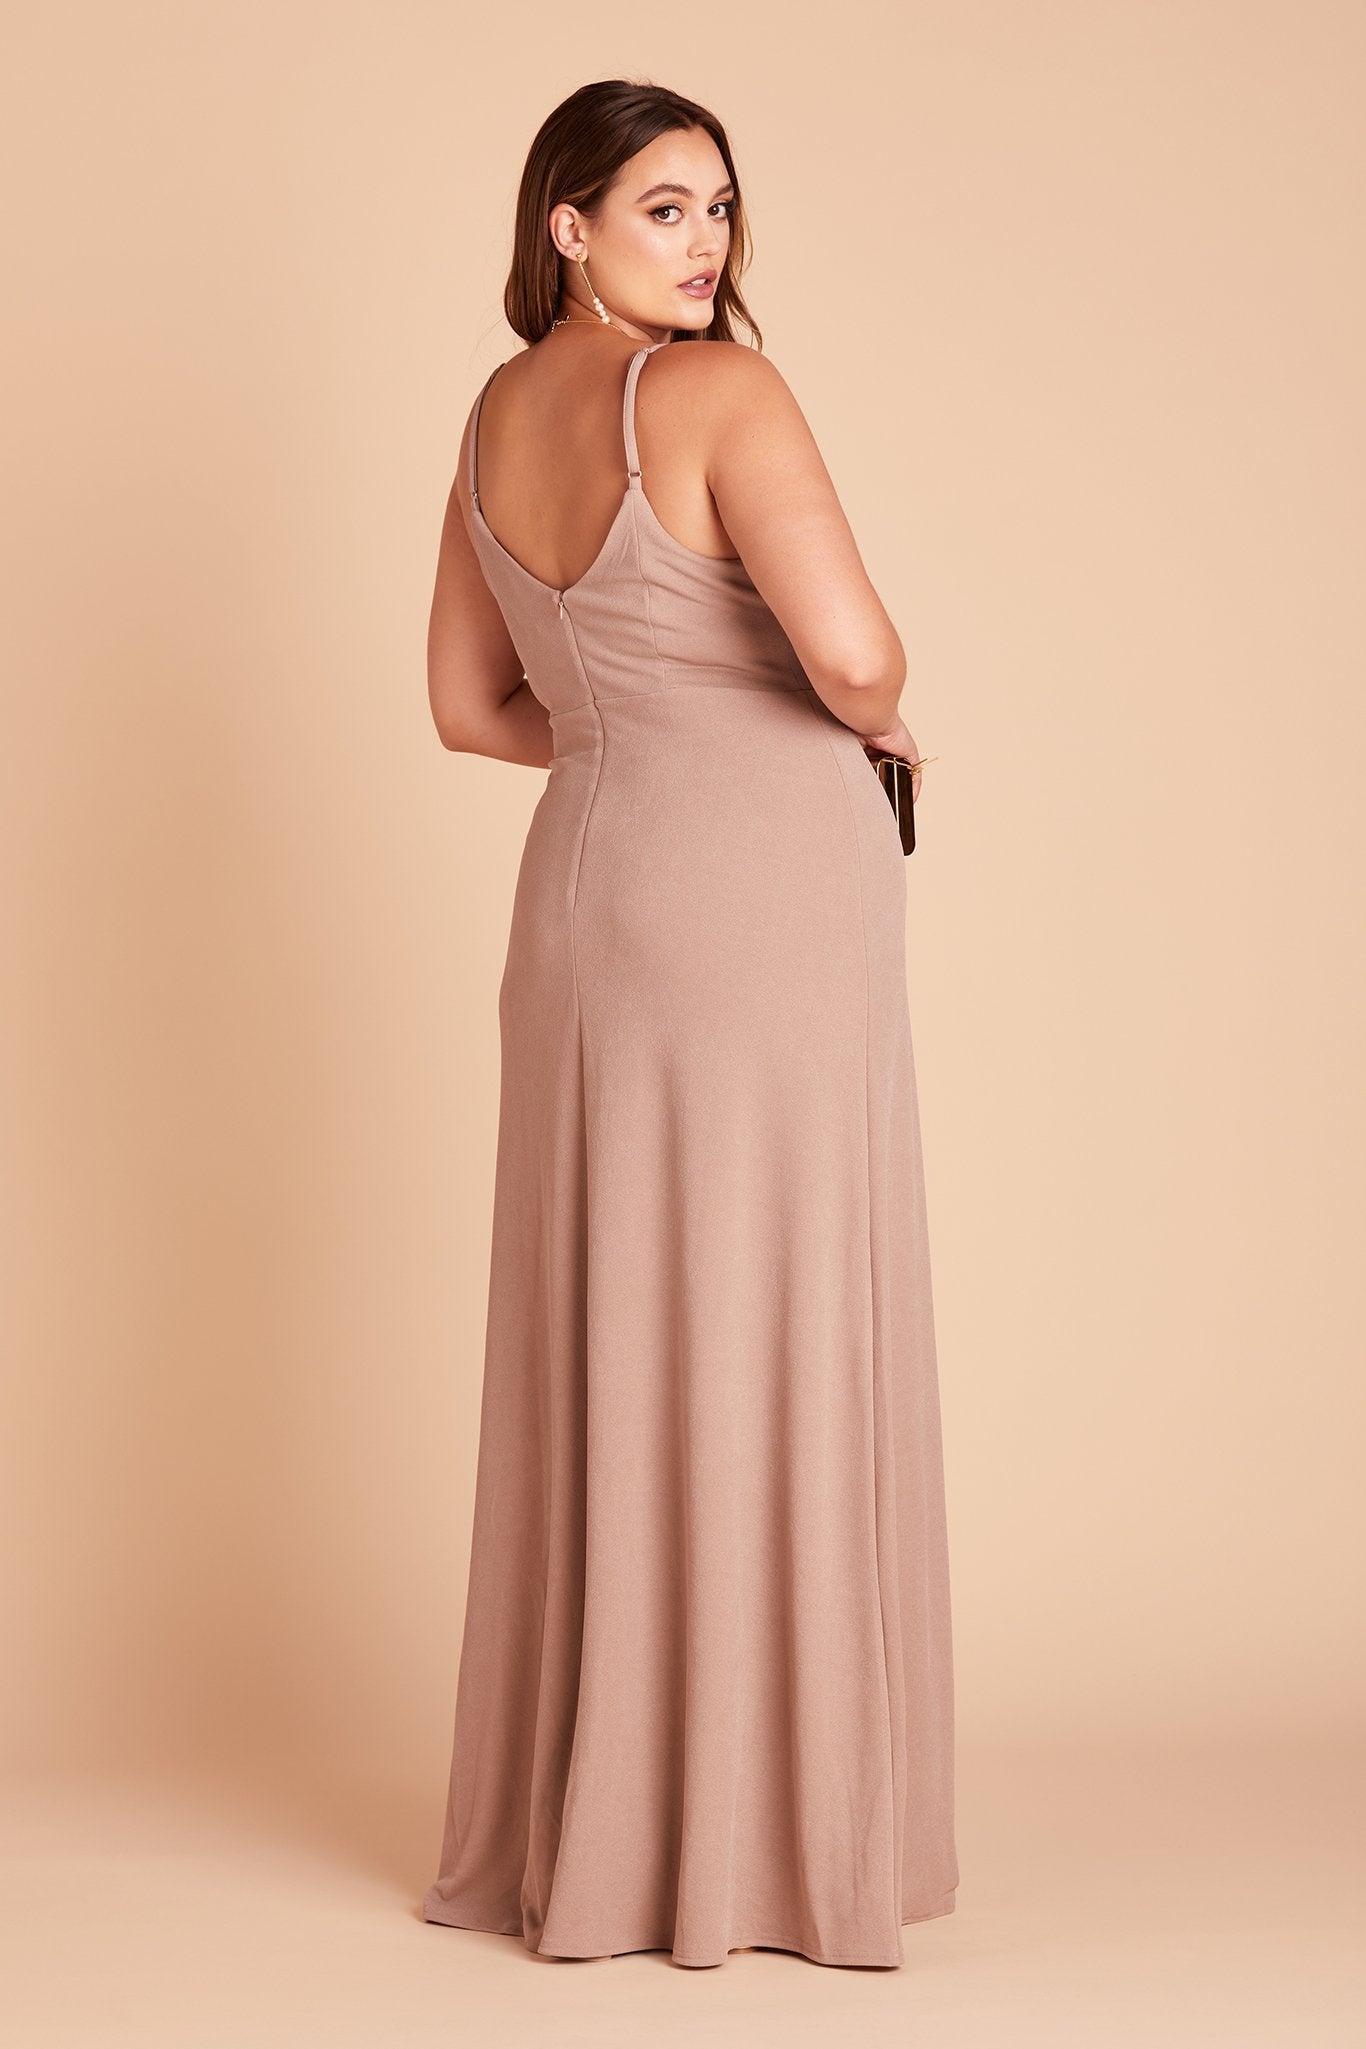 Jay plus size bridesmaid dress with slit in taupe crepe by Birdy Grey, back view